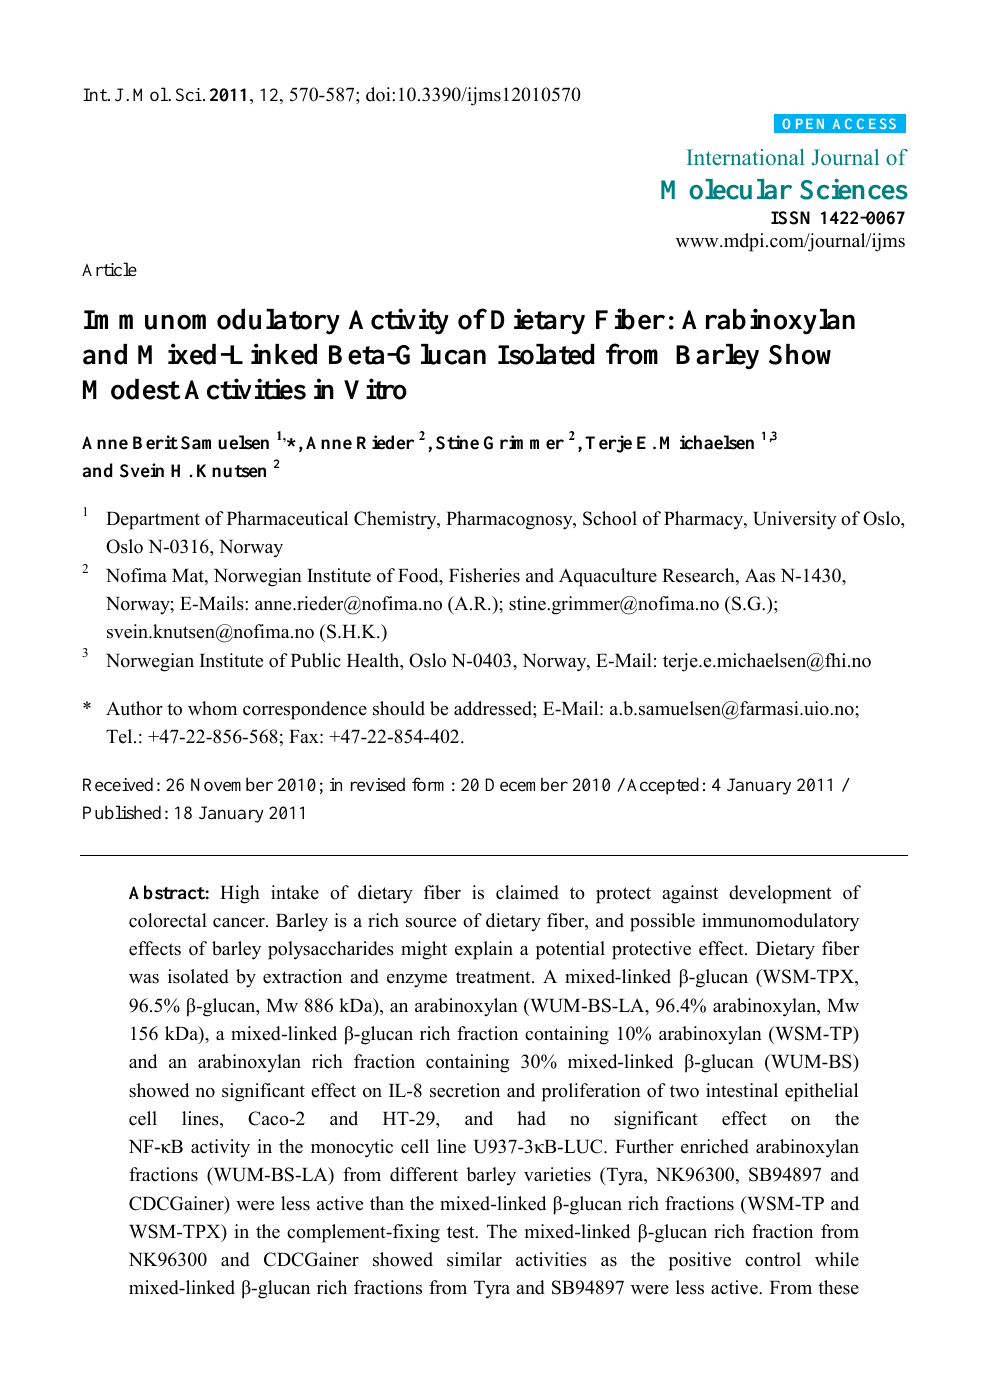 Immunomodulatory Activity Of Dietary Fiber Arabinoxylan And Mixed Linked Beta Glucan Isolated From Barley Show Modest Activities In Vitro Topic Of Research Paper In Biological Sciences Download Scholarly Article Pdf And Read For